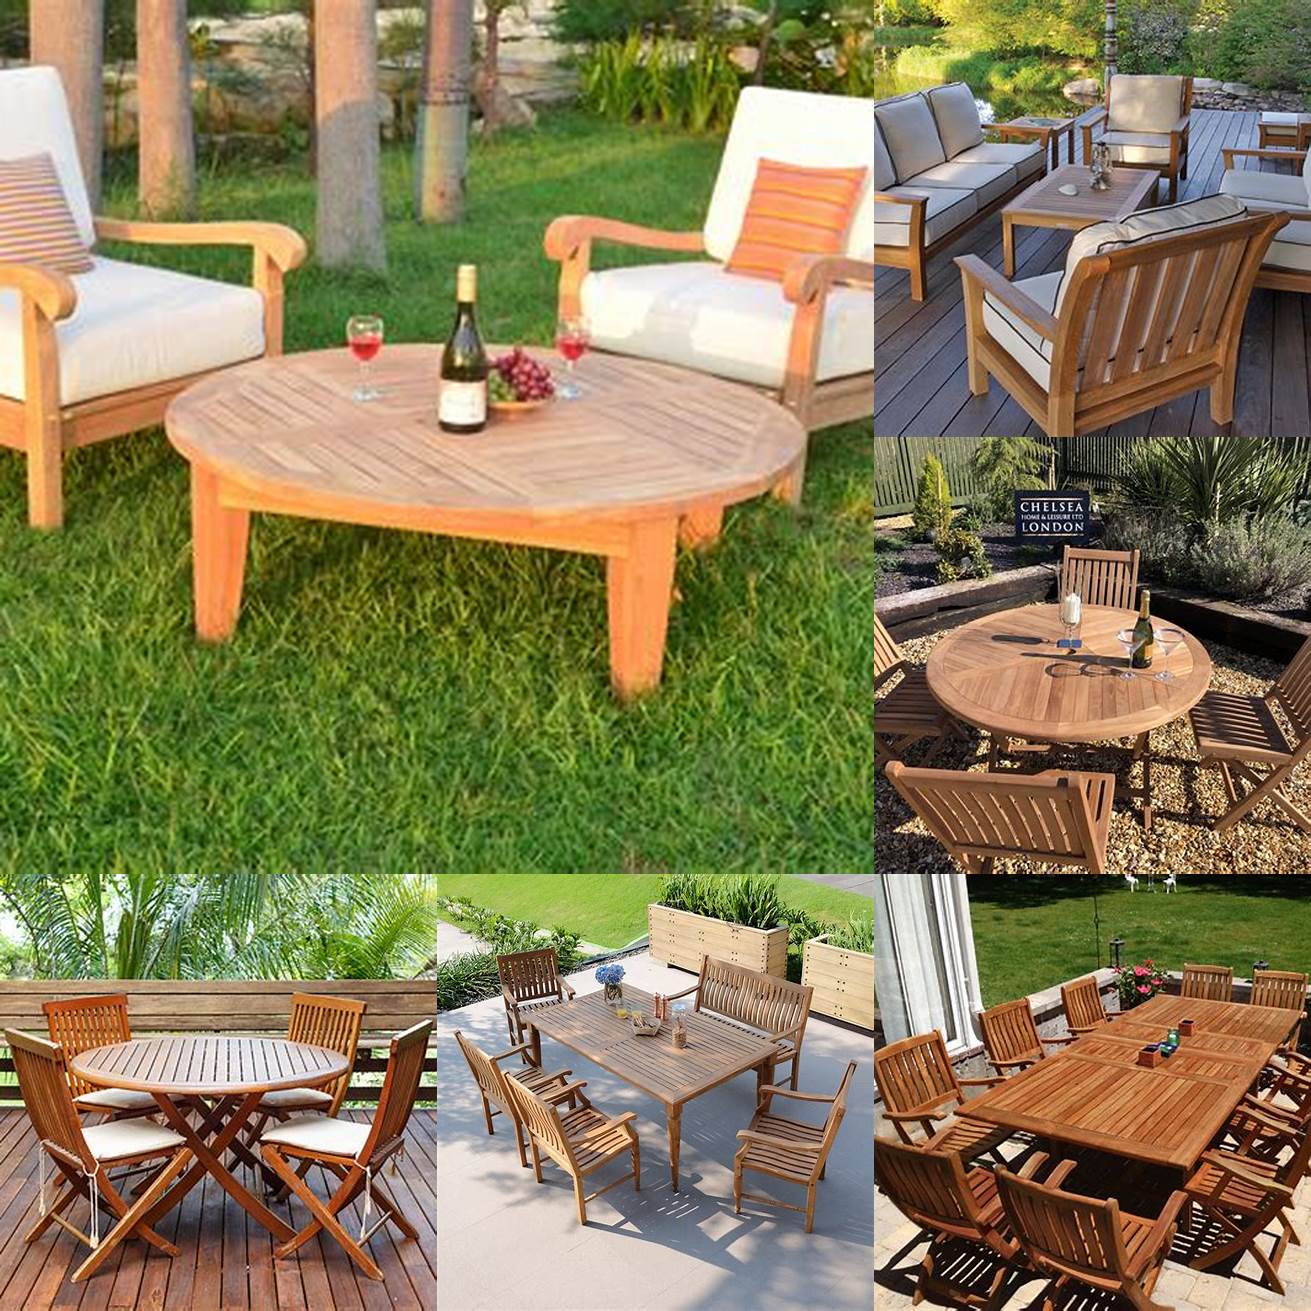 Teak furniture in a shady outdoor setting